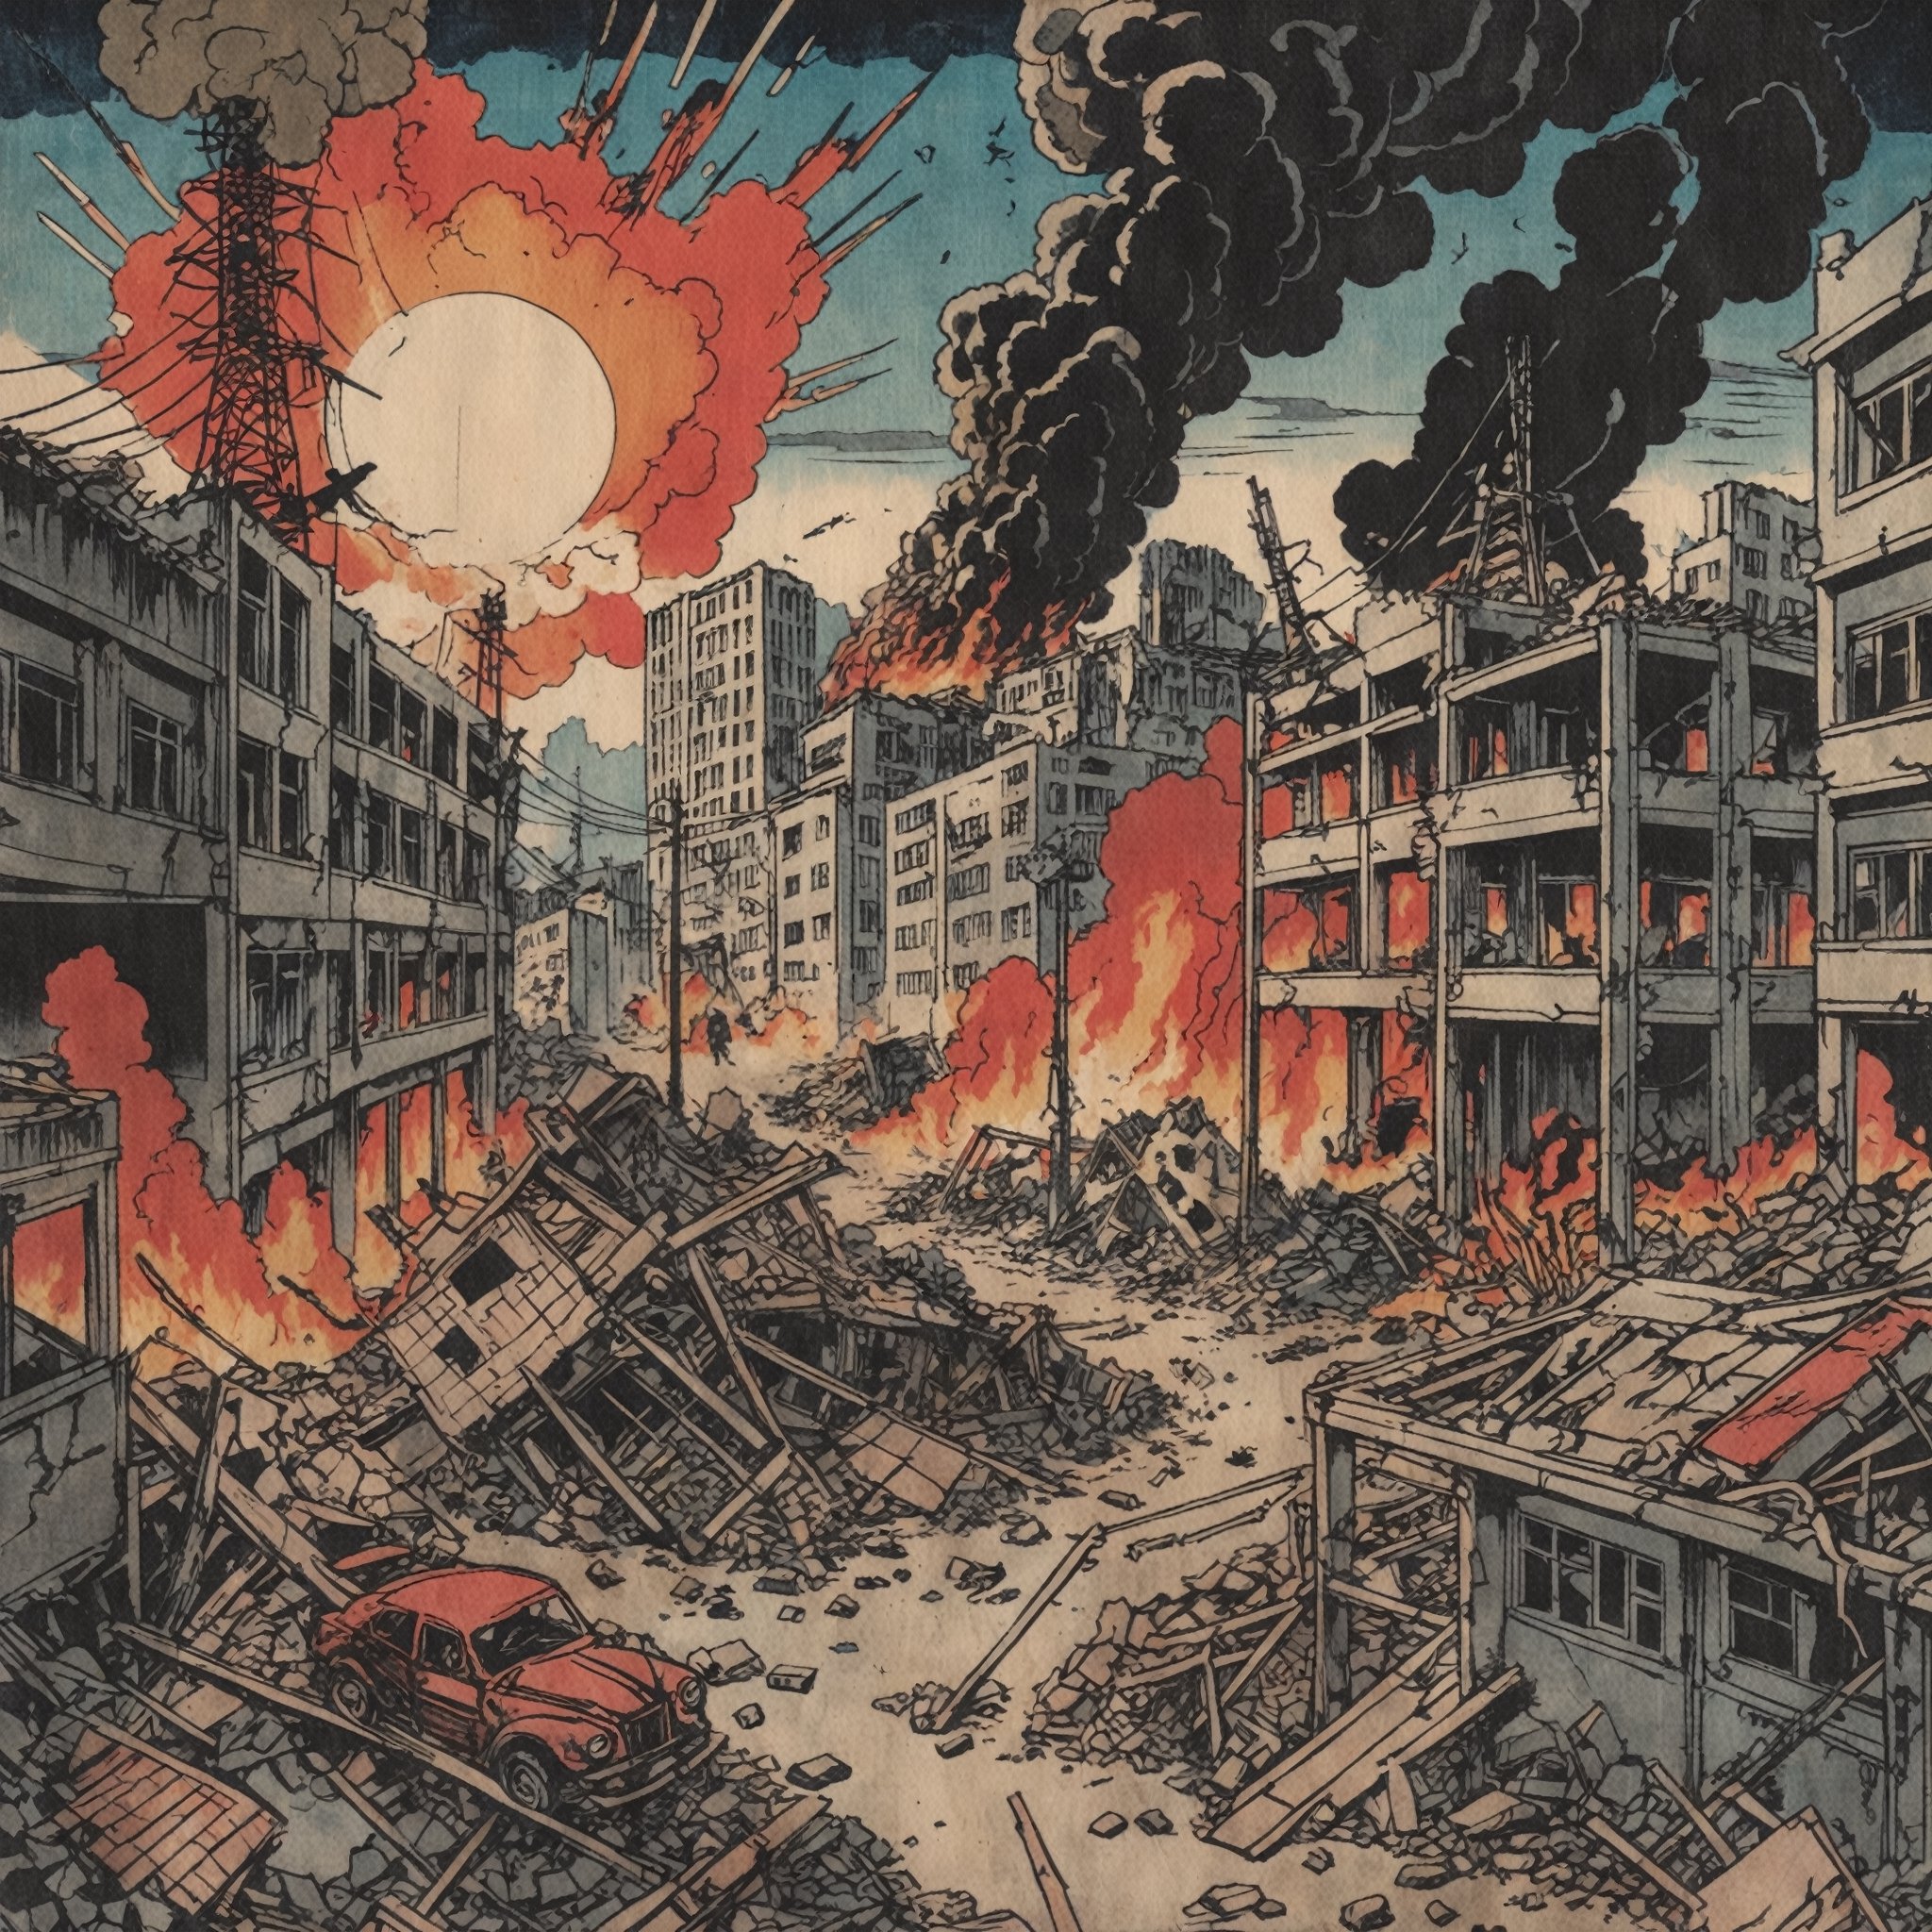 Colourful ukiyoe of a destroyed City after an atomic blast, post apocalyptic vibes, detailed,Ukiyo-e